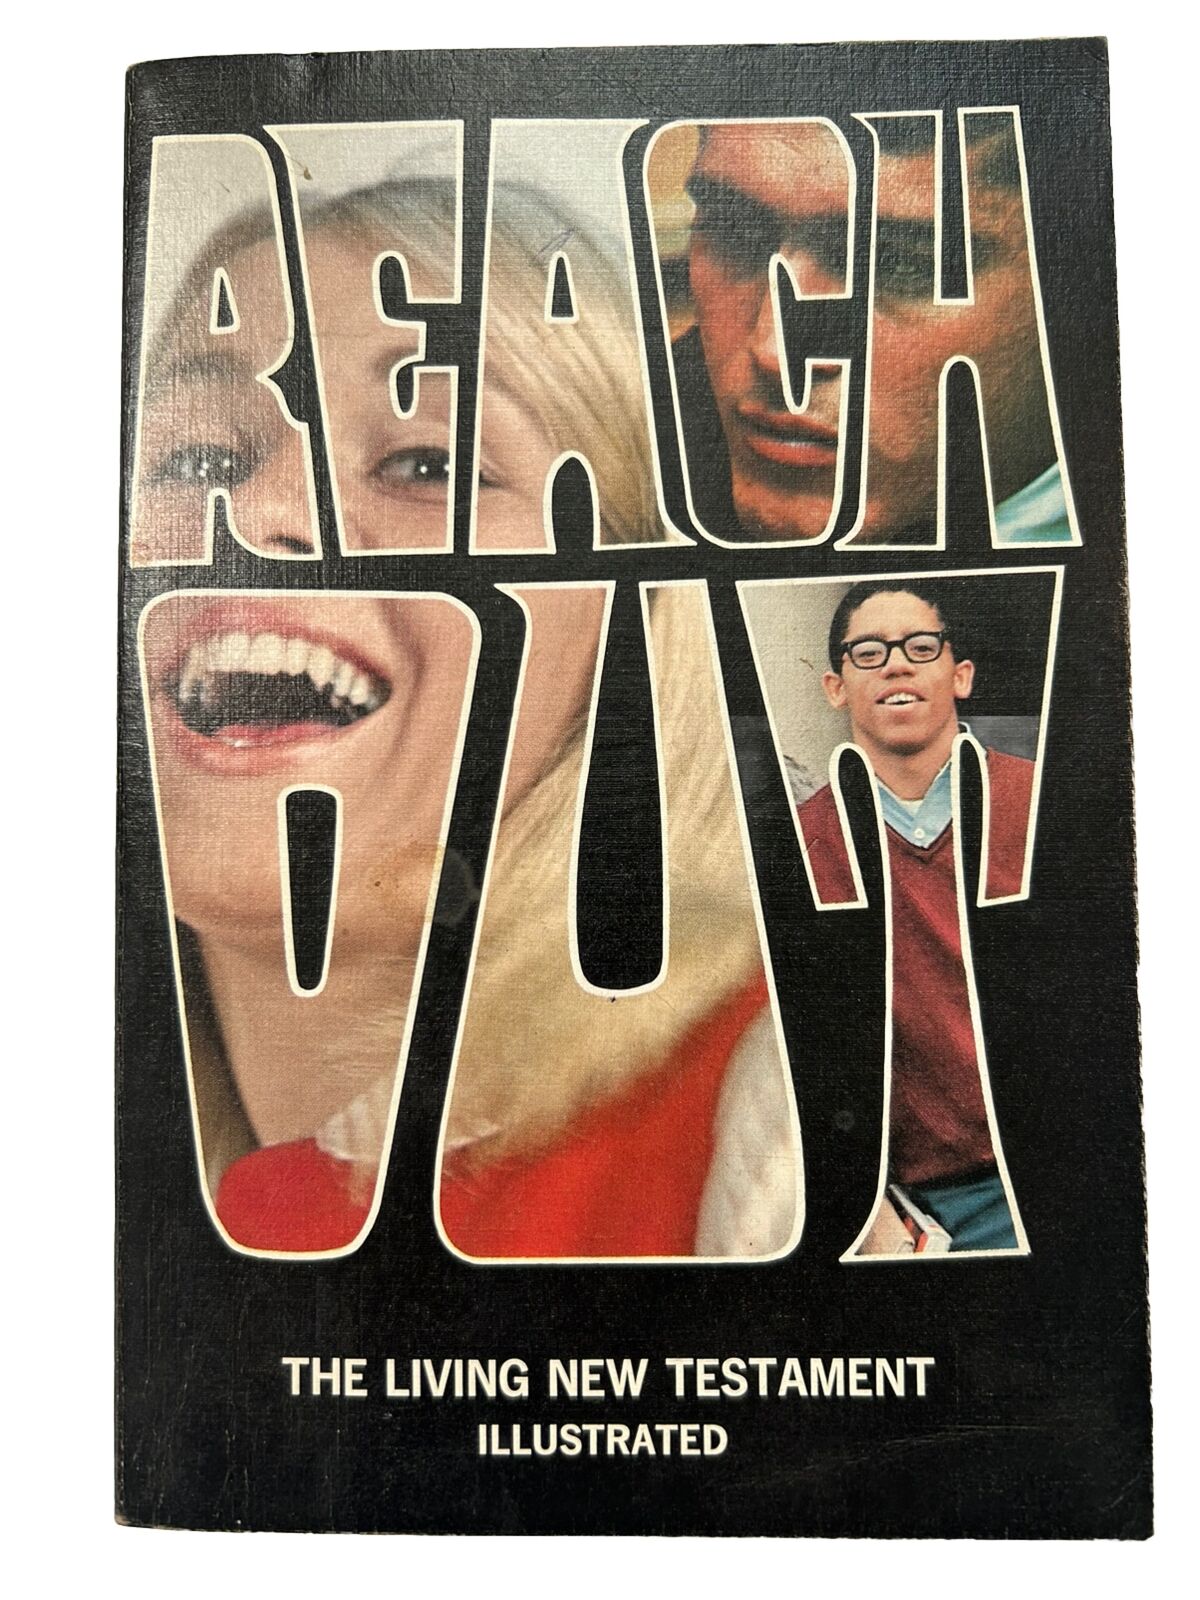 Vintage 1967 Reach Out The Living New Testament Illustrated Paperback Religion